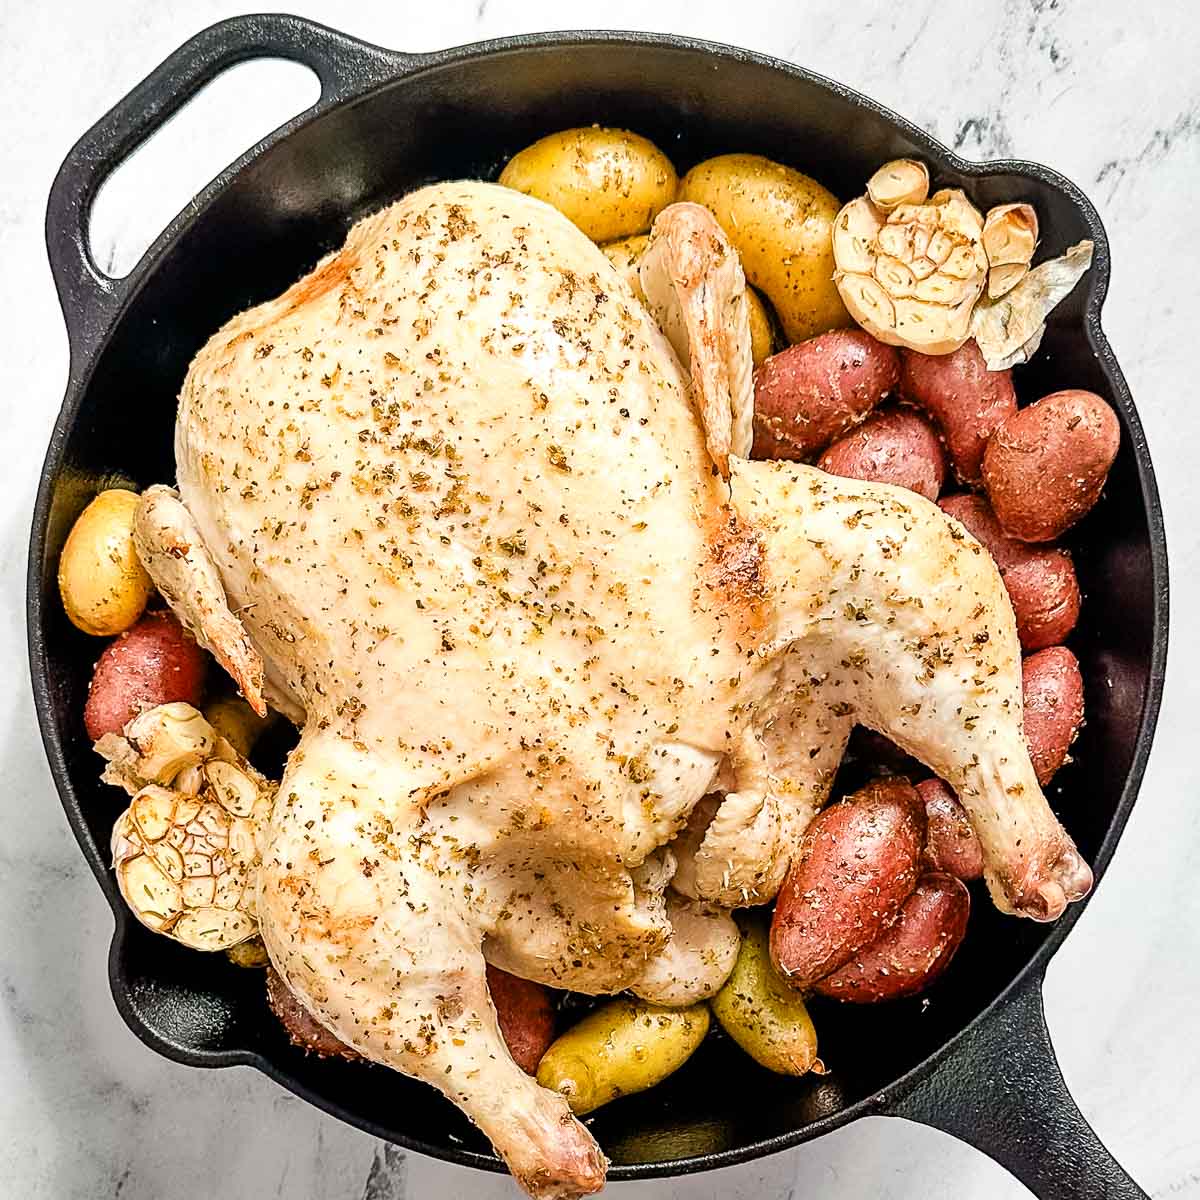 A half-cooked chicken, roasted garlic, and potatoes in a cast iron skillet.